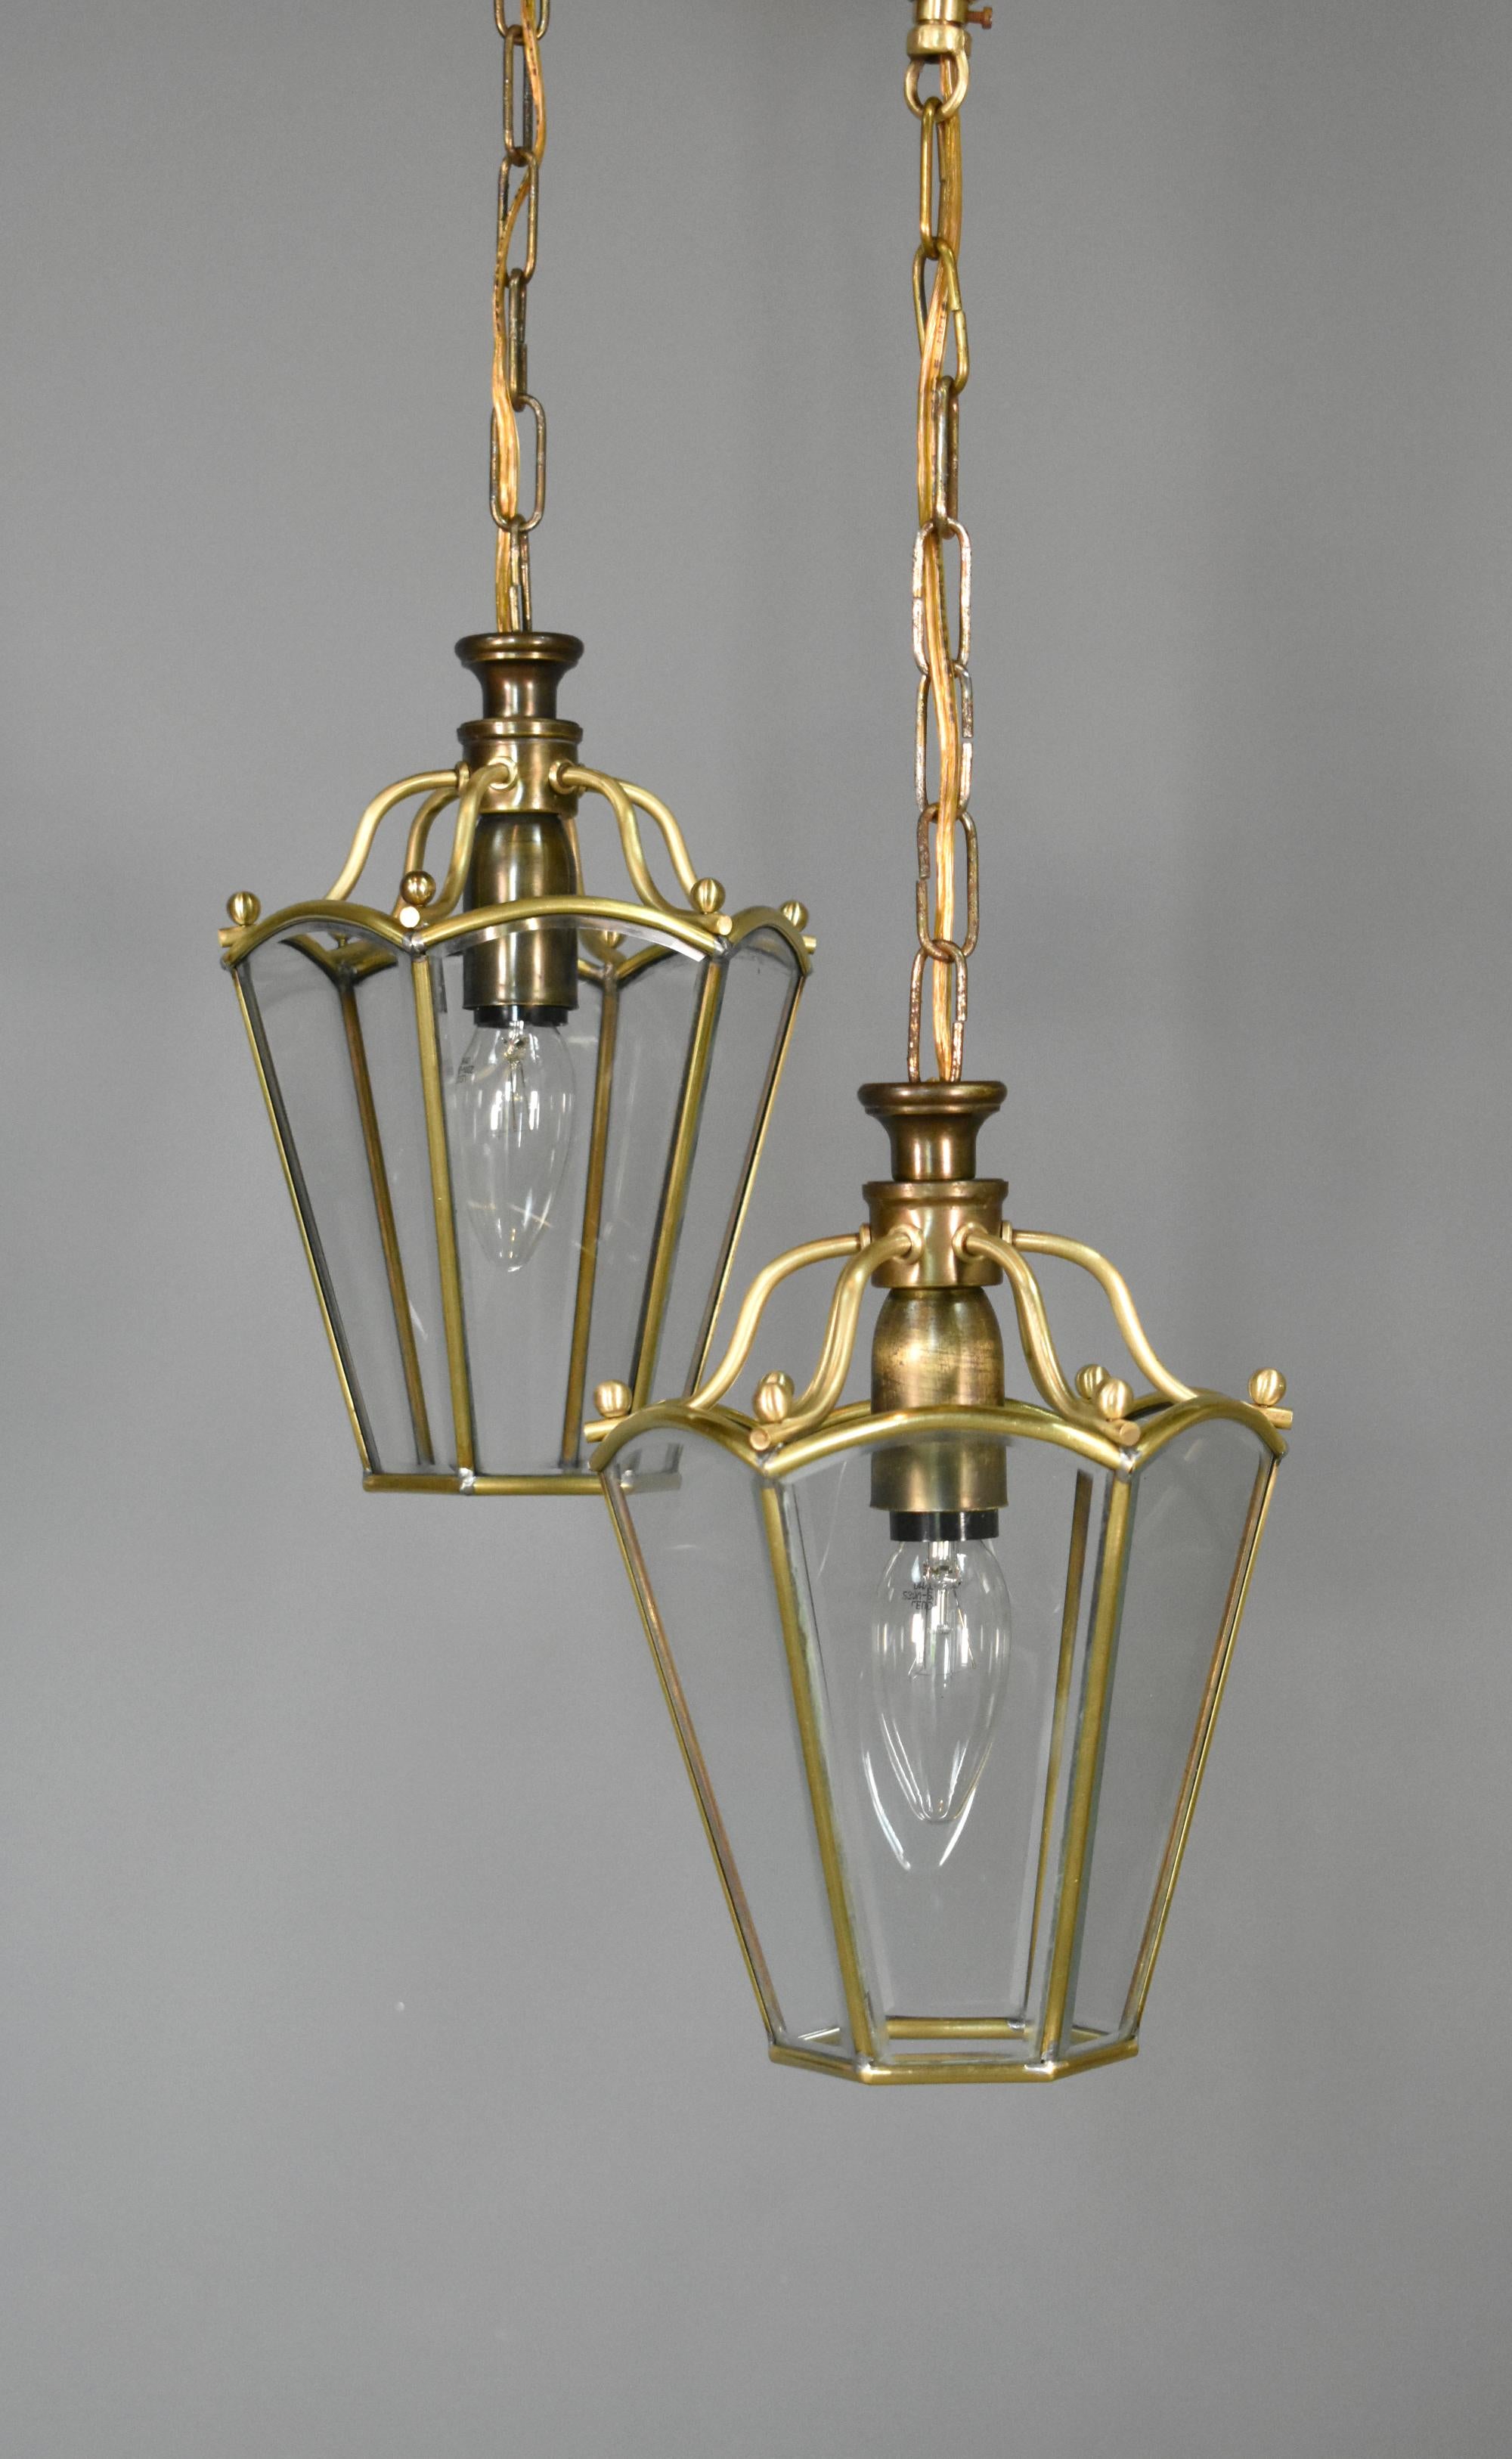 Pair Matching Brass Lanterns
 
An attractive pair of small hexagonal hanging lanterns with clear bevelled glass panels held within a polished brass frame.
 
In excellent condition, these classically styled lanterns would bring a touch of elegance